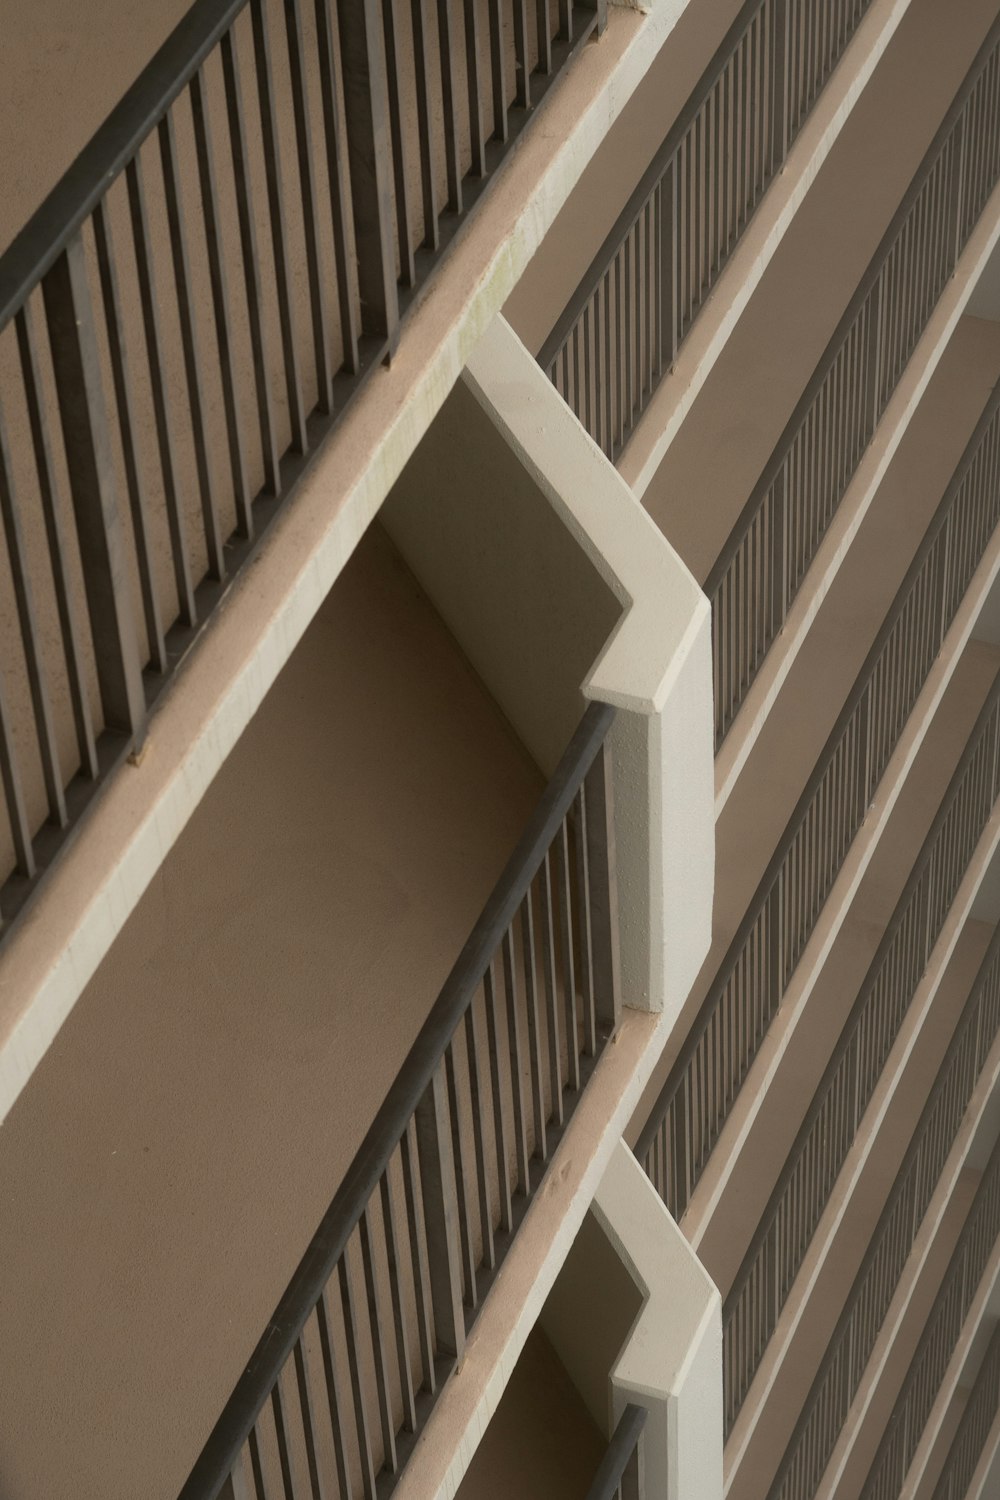 a close up of a building with balconies